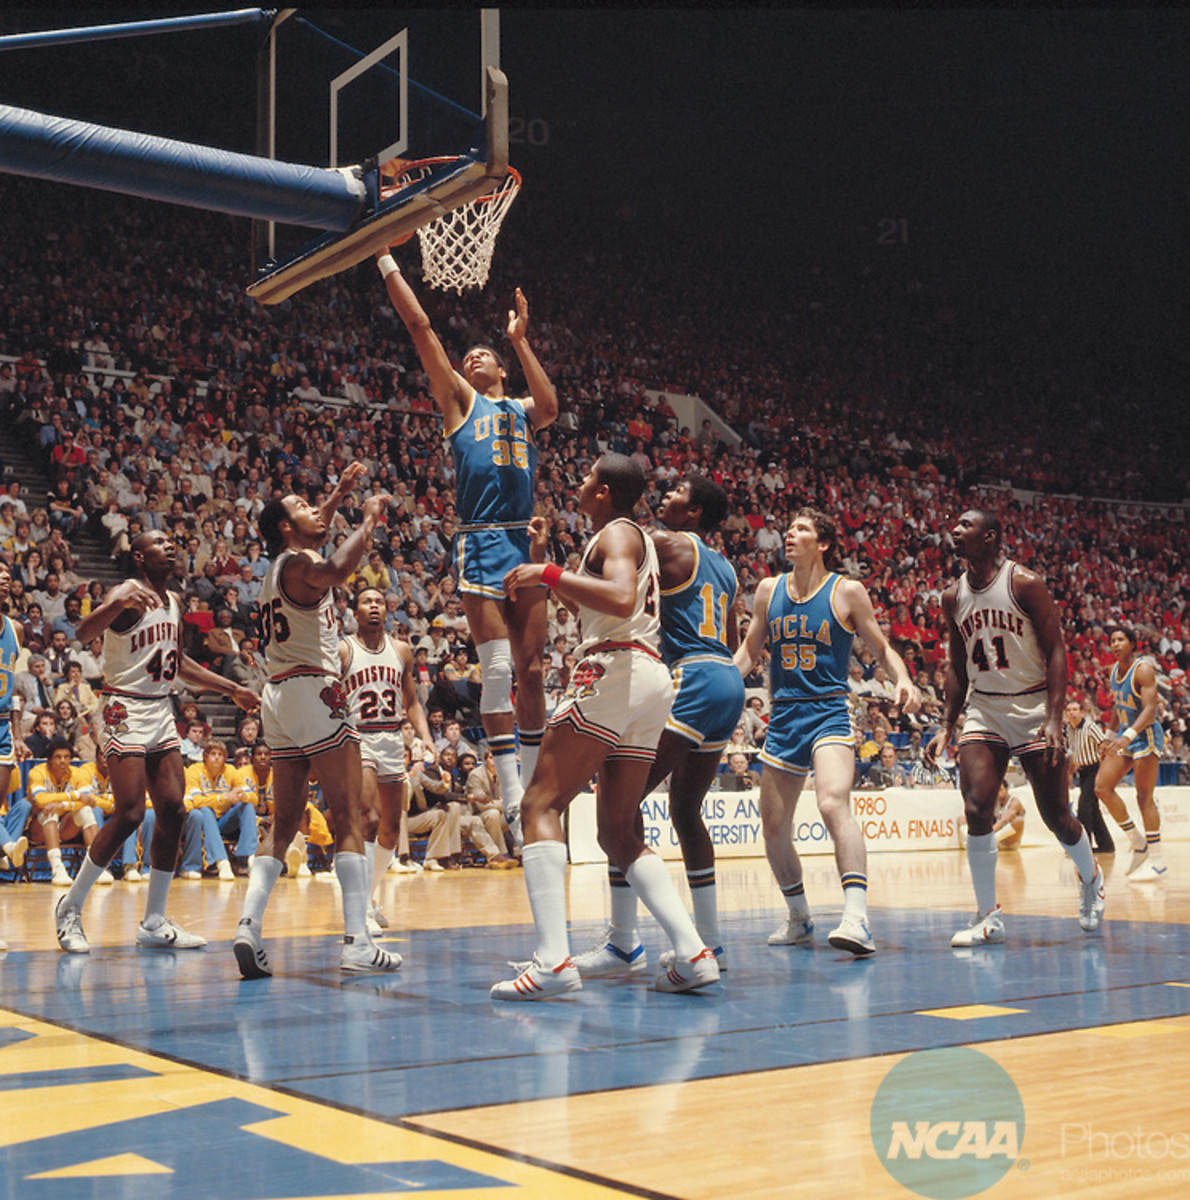 24 MAR 1980:  UCLA forward James Wilkes (35), forward Mike Sanders (11), forward Kiki Vandeweghe (55), and Louisville forward Derek Smith (43), guard Darrell Griffith (35), guard Tony Branch (23), forward Scooter McCray (21) and center Wiley Brown (41) during the NCAA Men's National Basketball Final Four championship game held in Indainapolis, IN, at the Market Square Arena. Louisville defeated UCLA 59-54 for the championship. Photo by Rich Clarkson/NCAA PhotosSI CD 0023-29